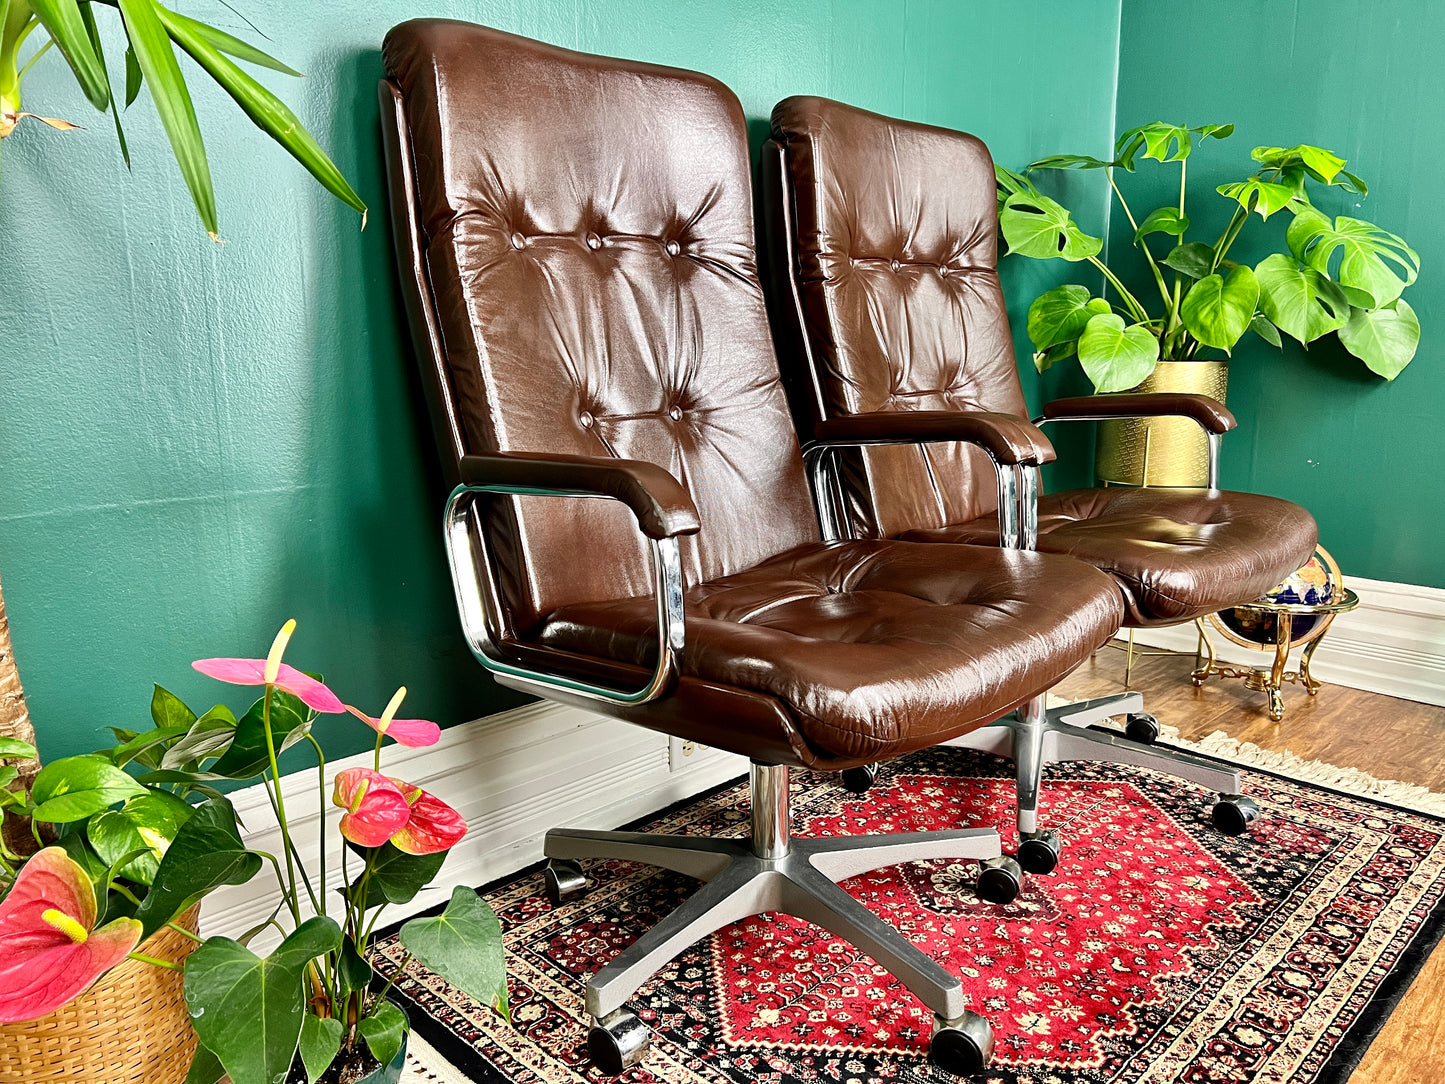 The Massimo Office Chairs - Only 1 left!